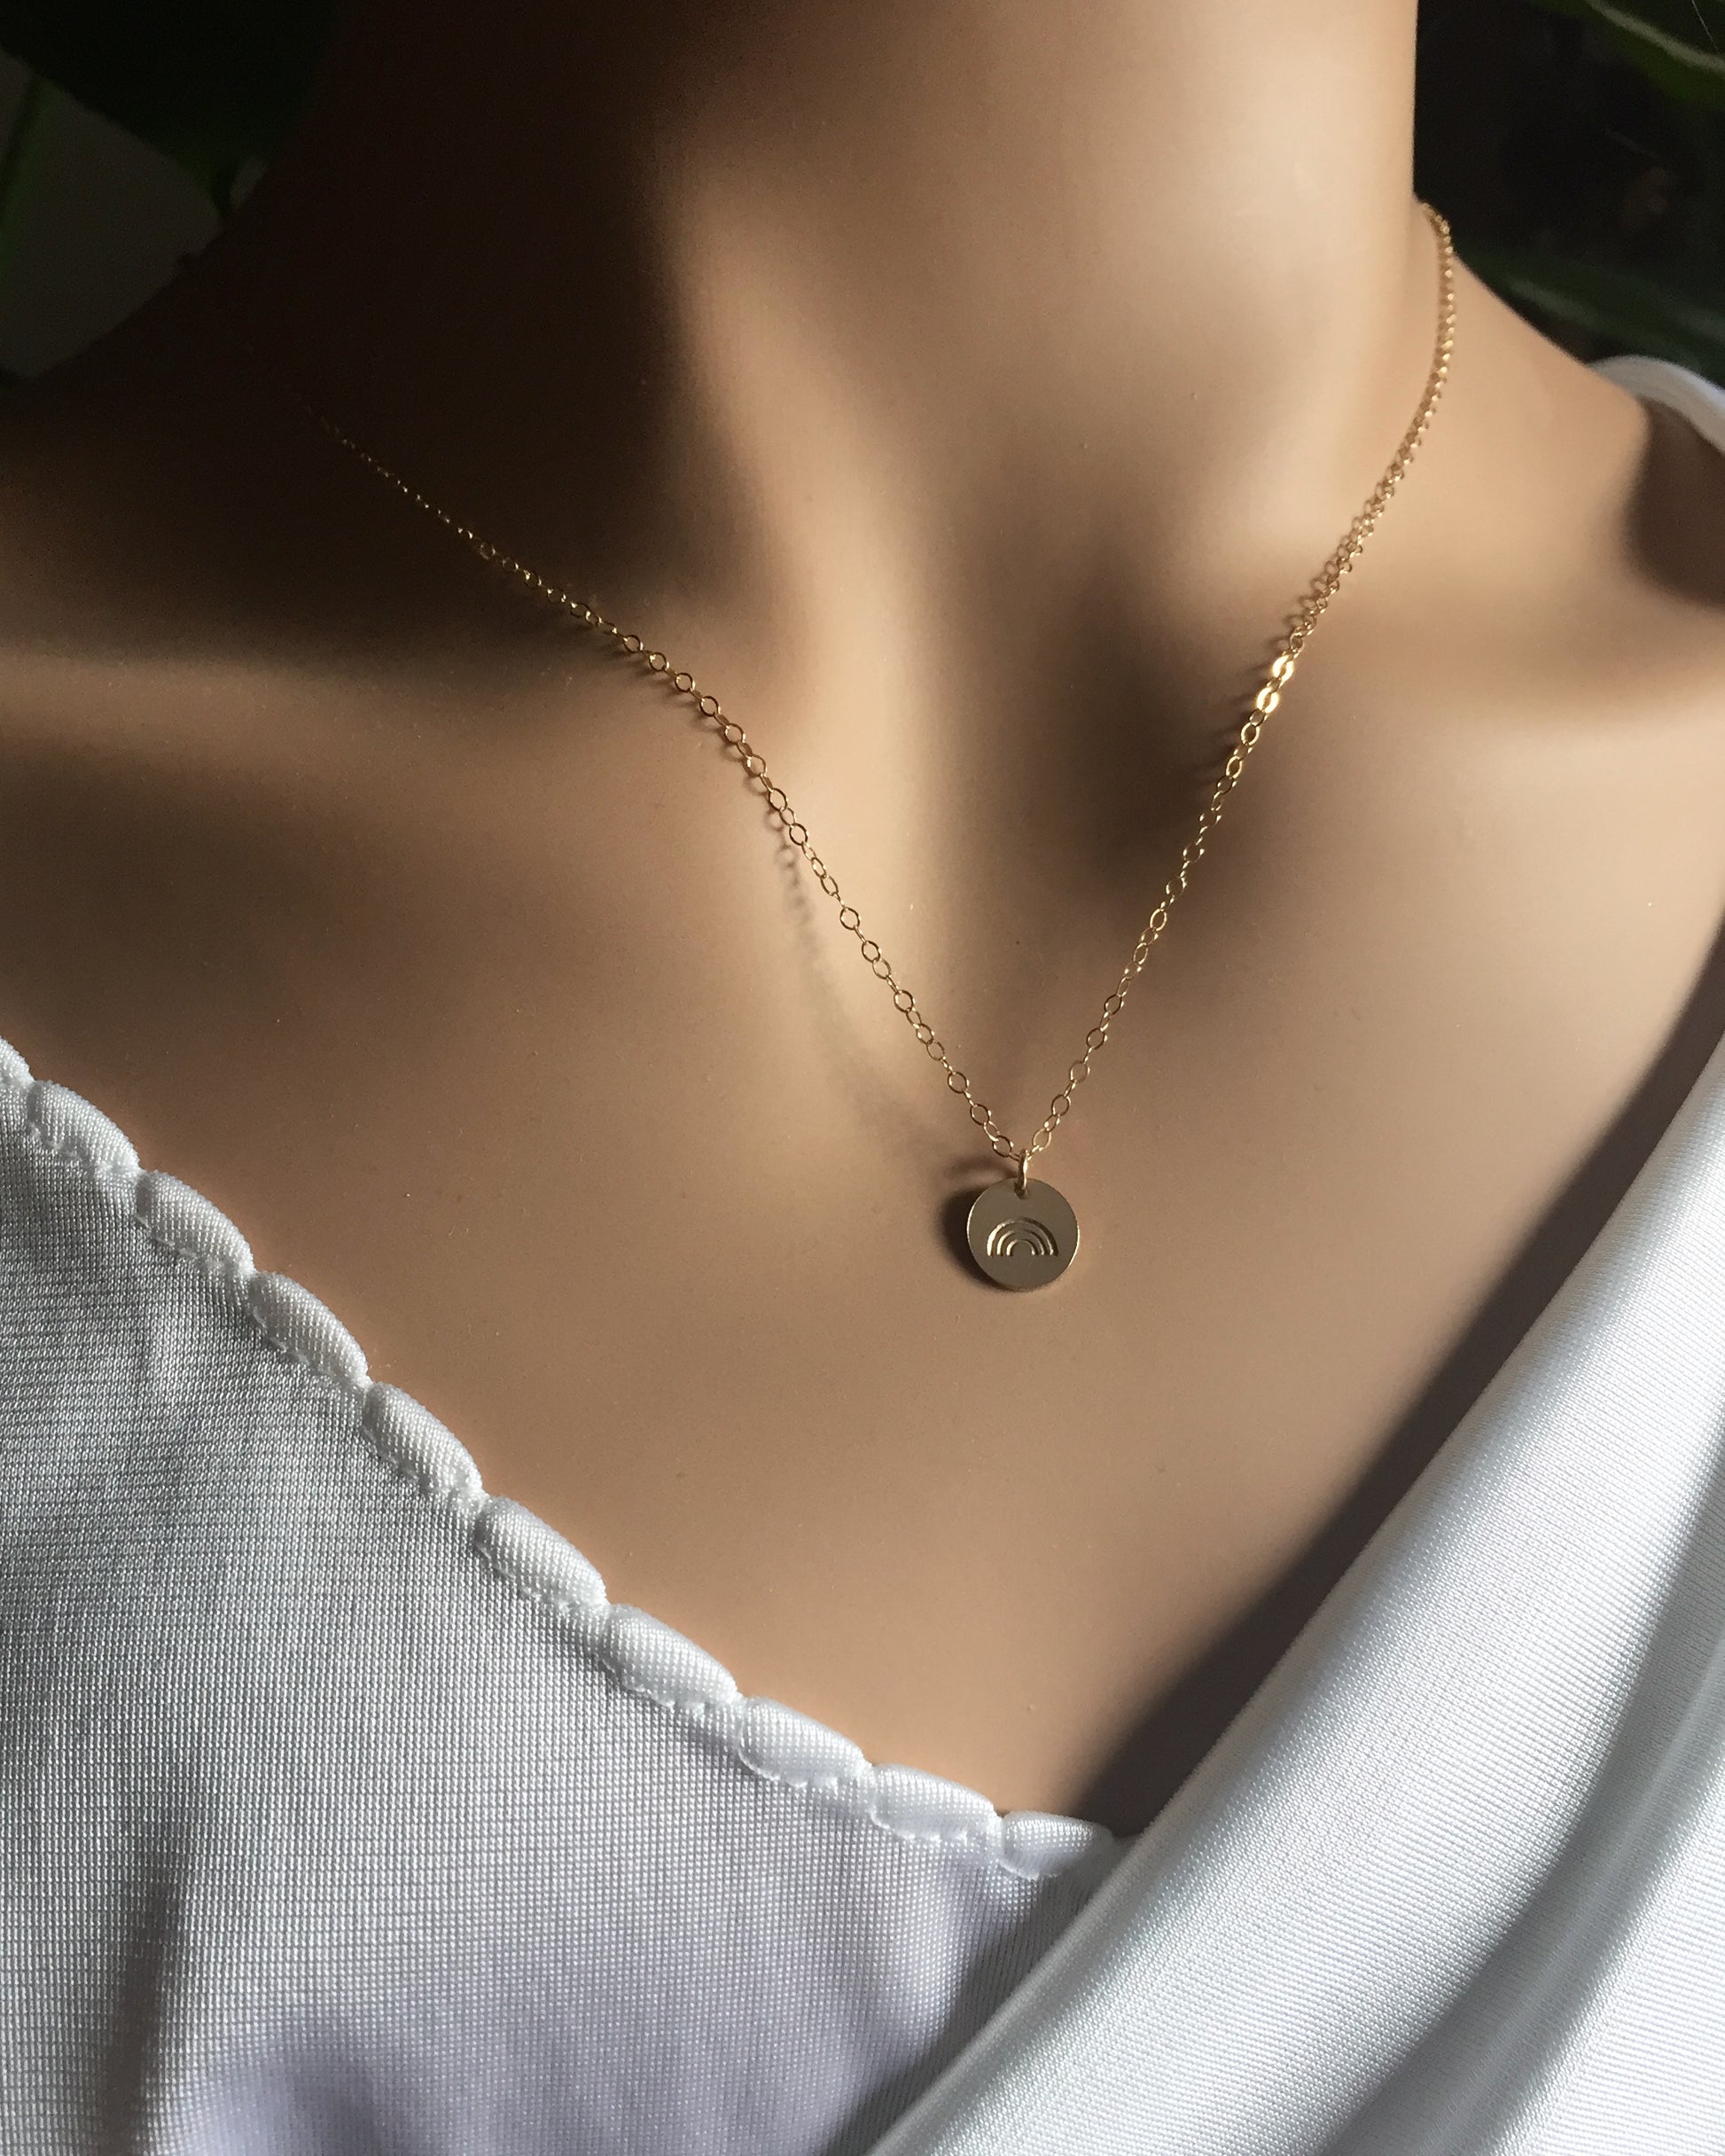 Dainty Rainbow Necklace In Gold Filled or Sterling Silver | Minimalist Necklace | IB Jewelry